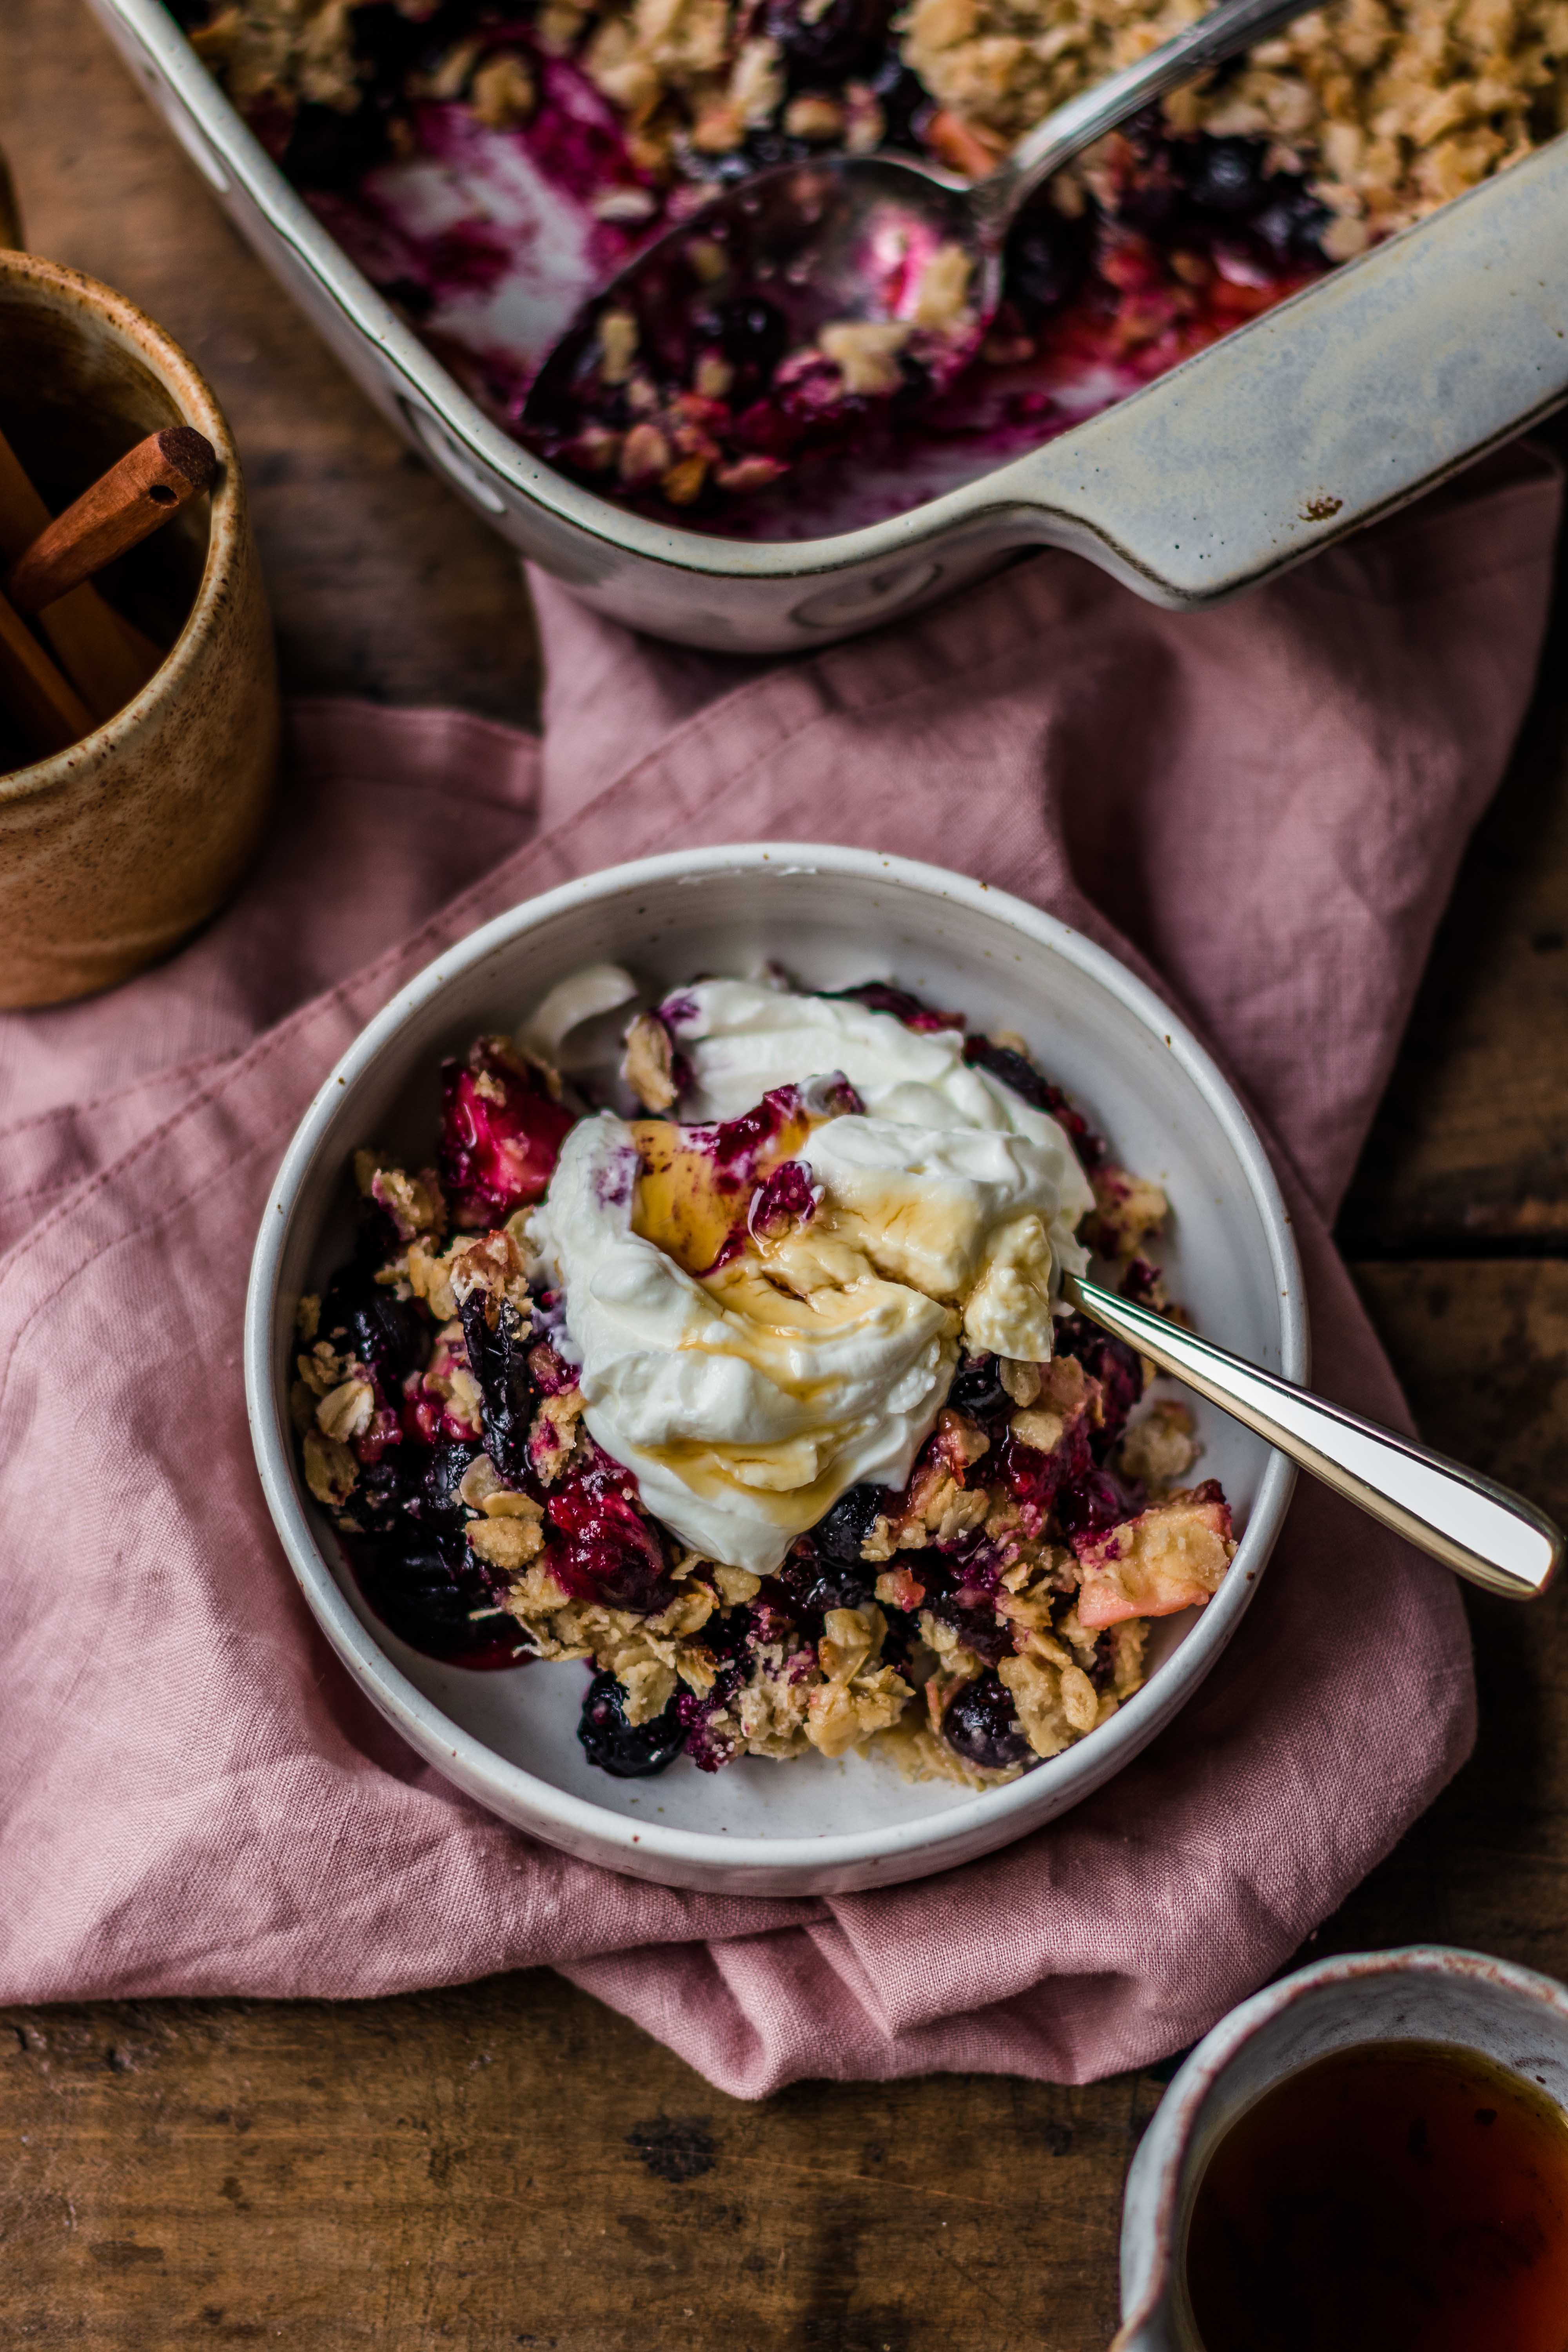 Apple & blueberry crumble